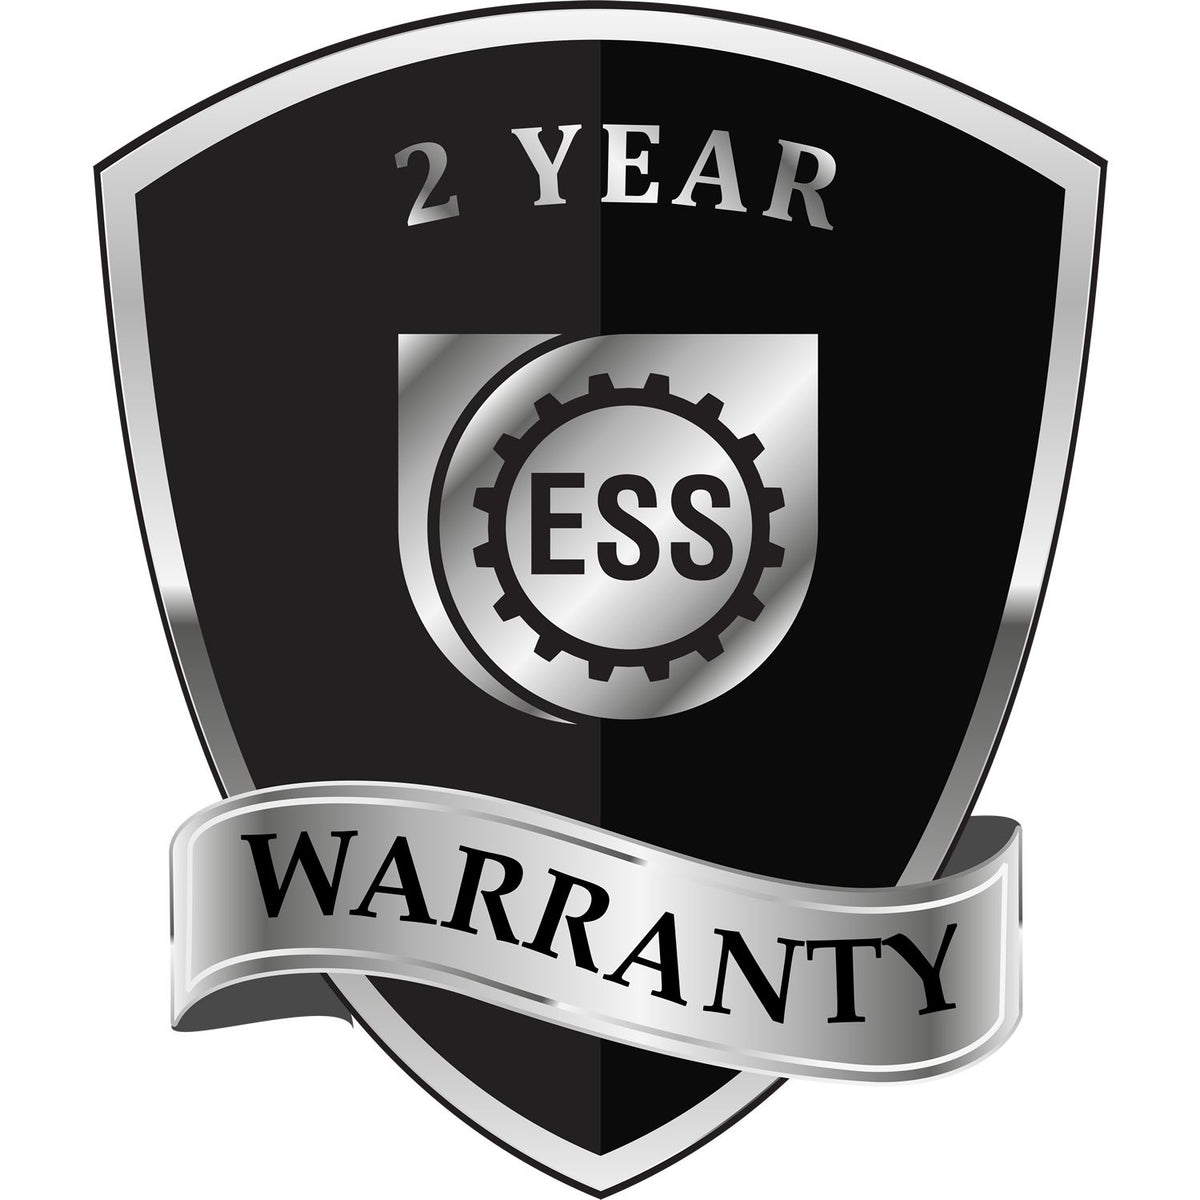 A badge or emblem showing a warranty icon for the District of Columbia Architectural Seal Embosser